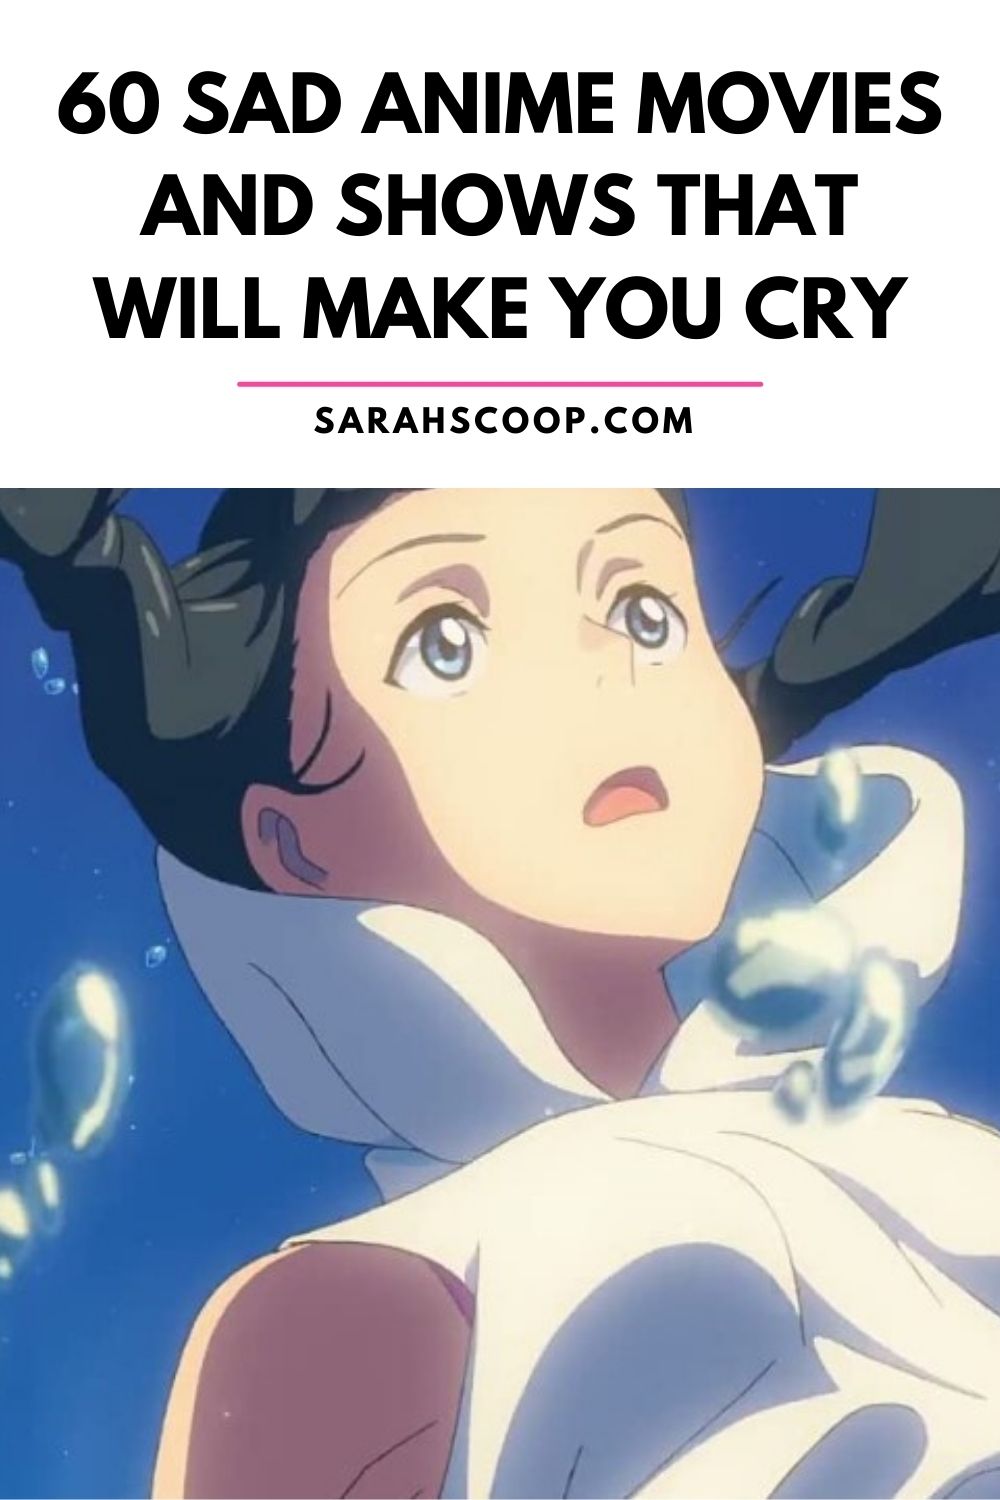 Top 60 Sad Anime Movies and Shows That Will Make You Cry - Sarah Scoop